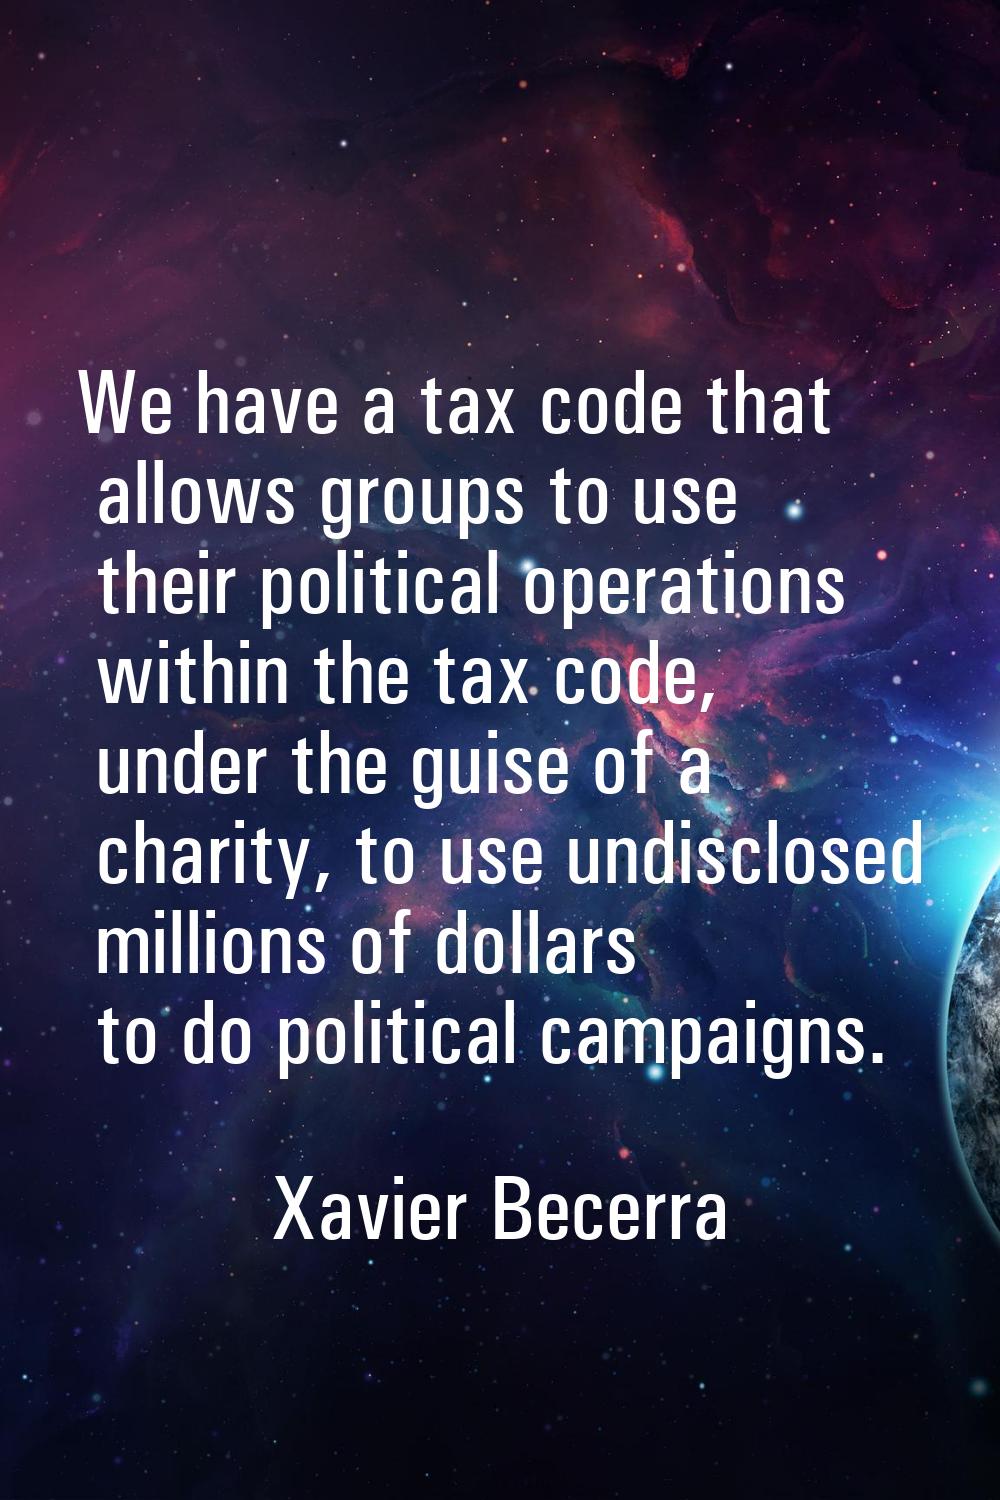 We have a tax code that allows groups to use their political operations within the tax code, under 